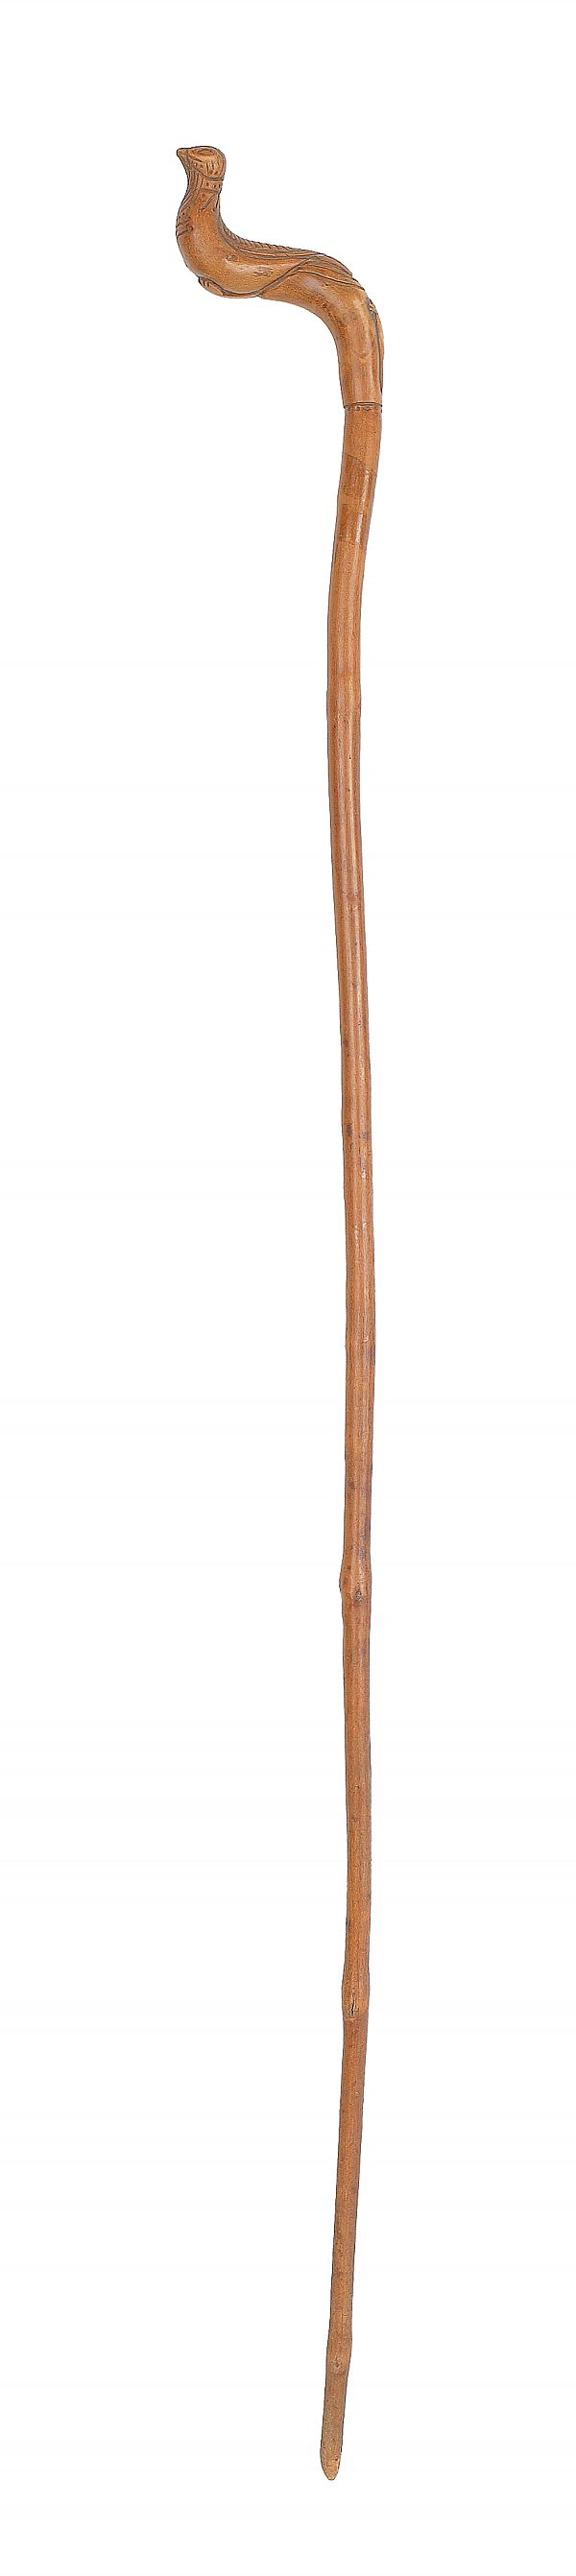 Carved cane late 19th c. with a bird